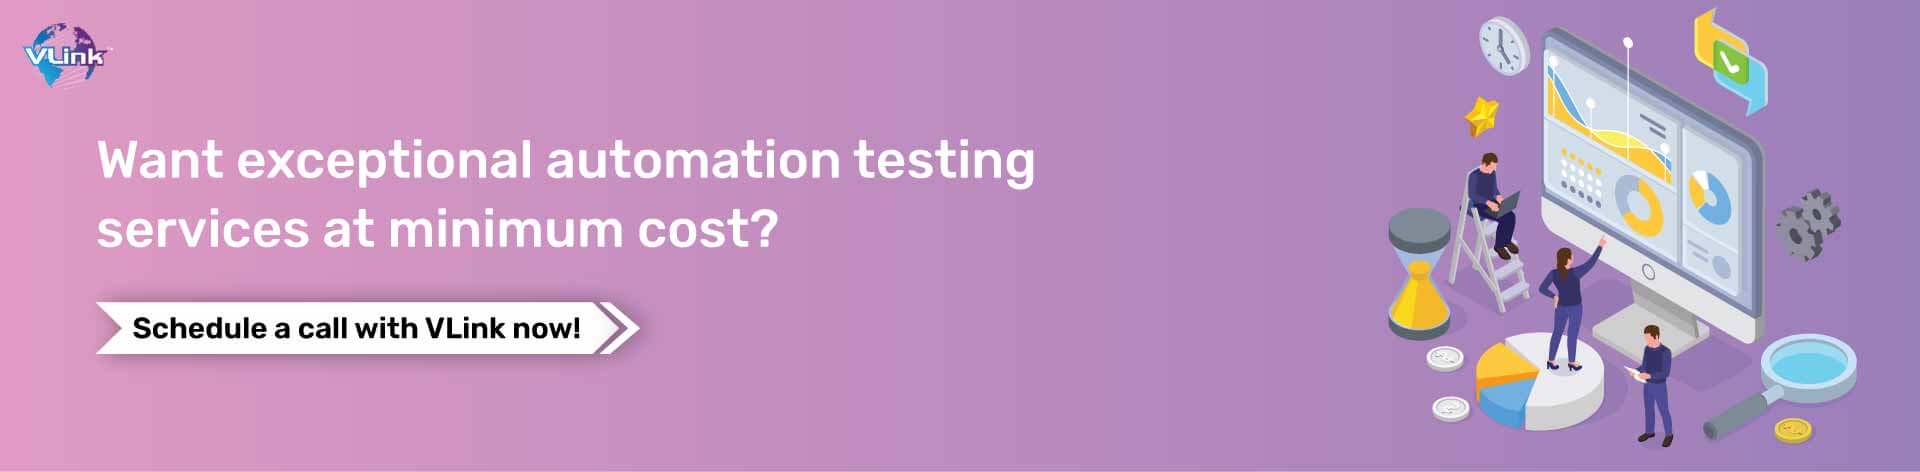 ultimate-guide-to-automation-testing-cta